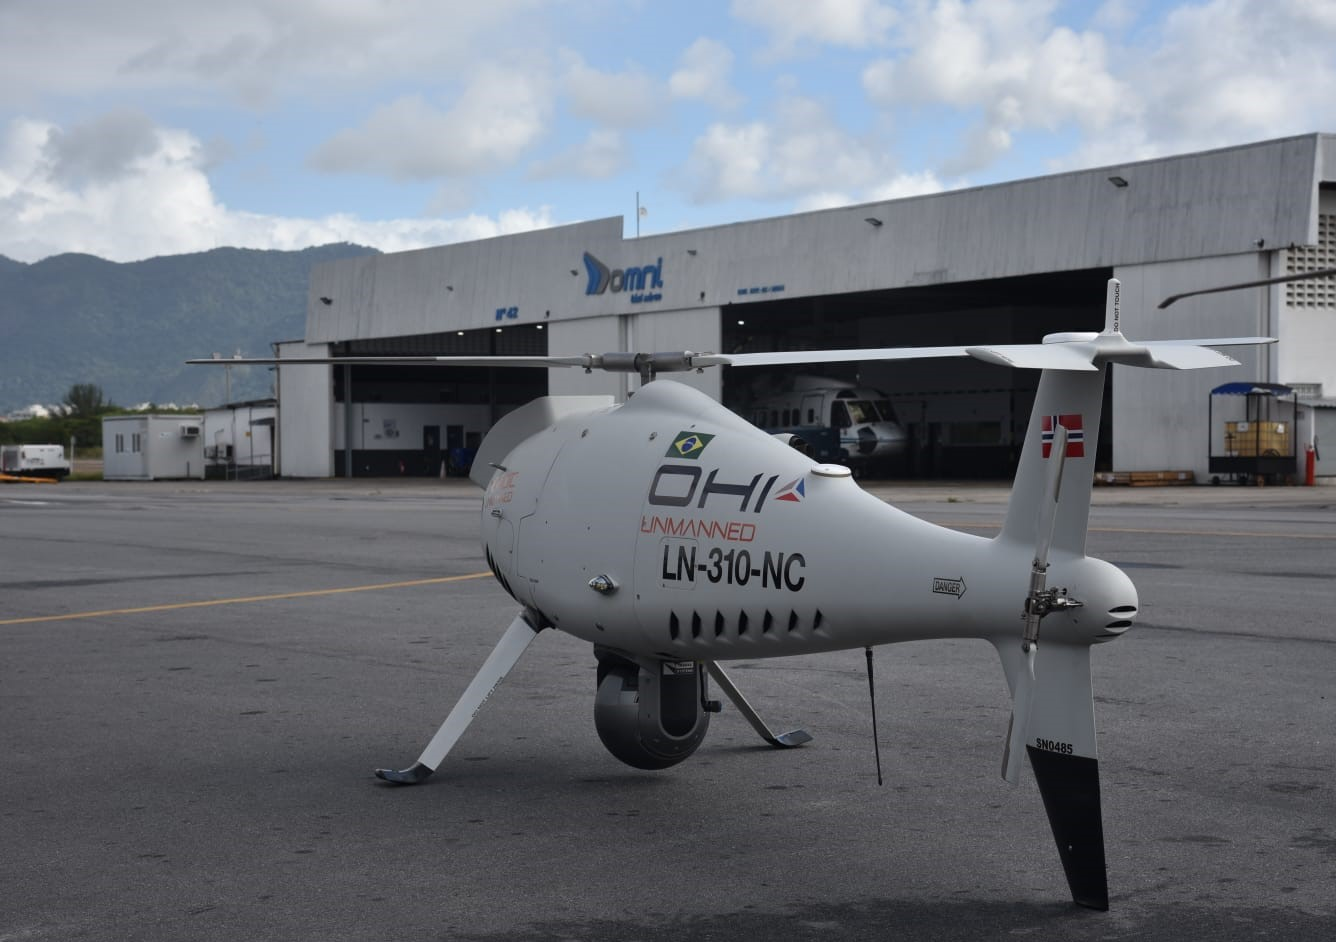 Omni Táxi Aéreo to Launch Brazil's First Unmanned Offshore Missions for Petrobras